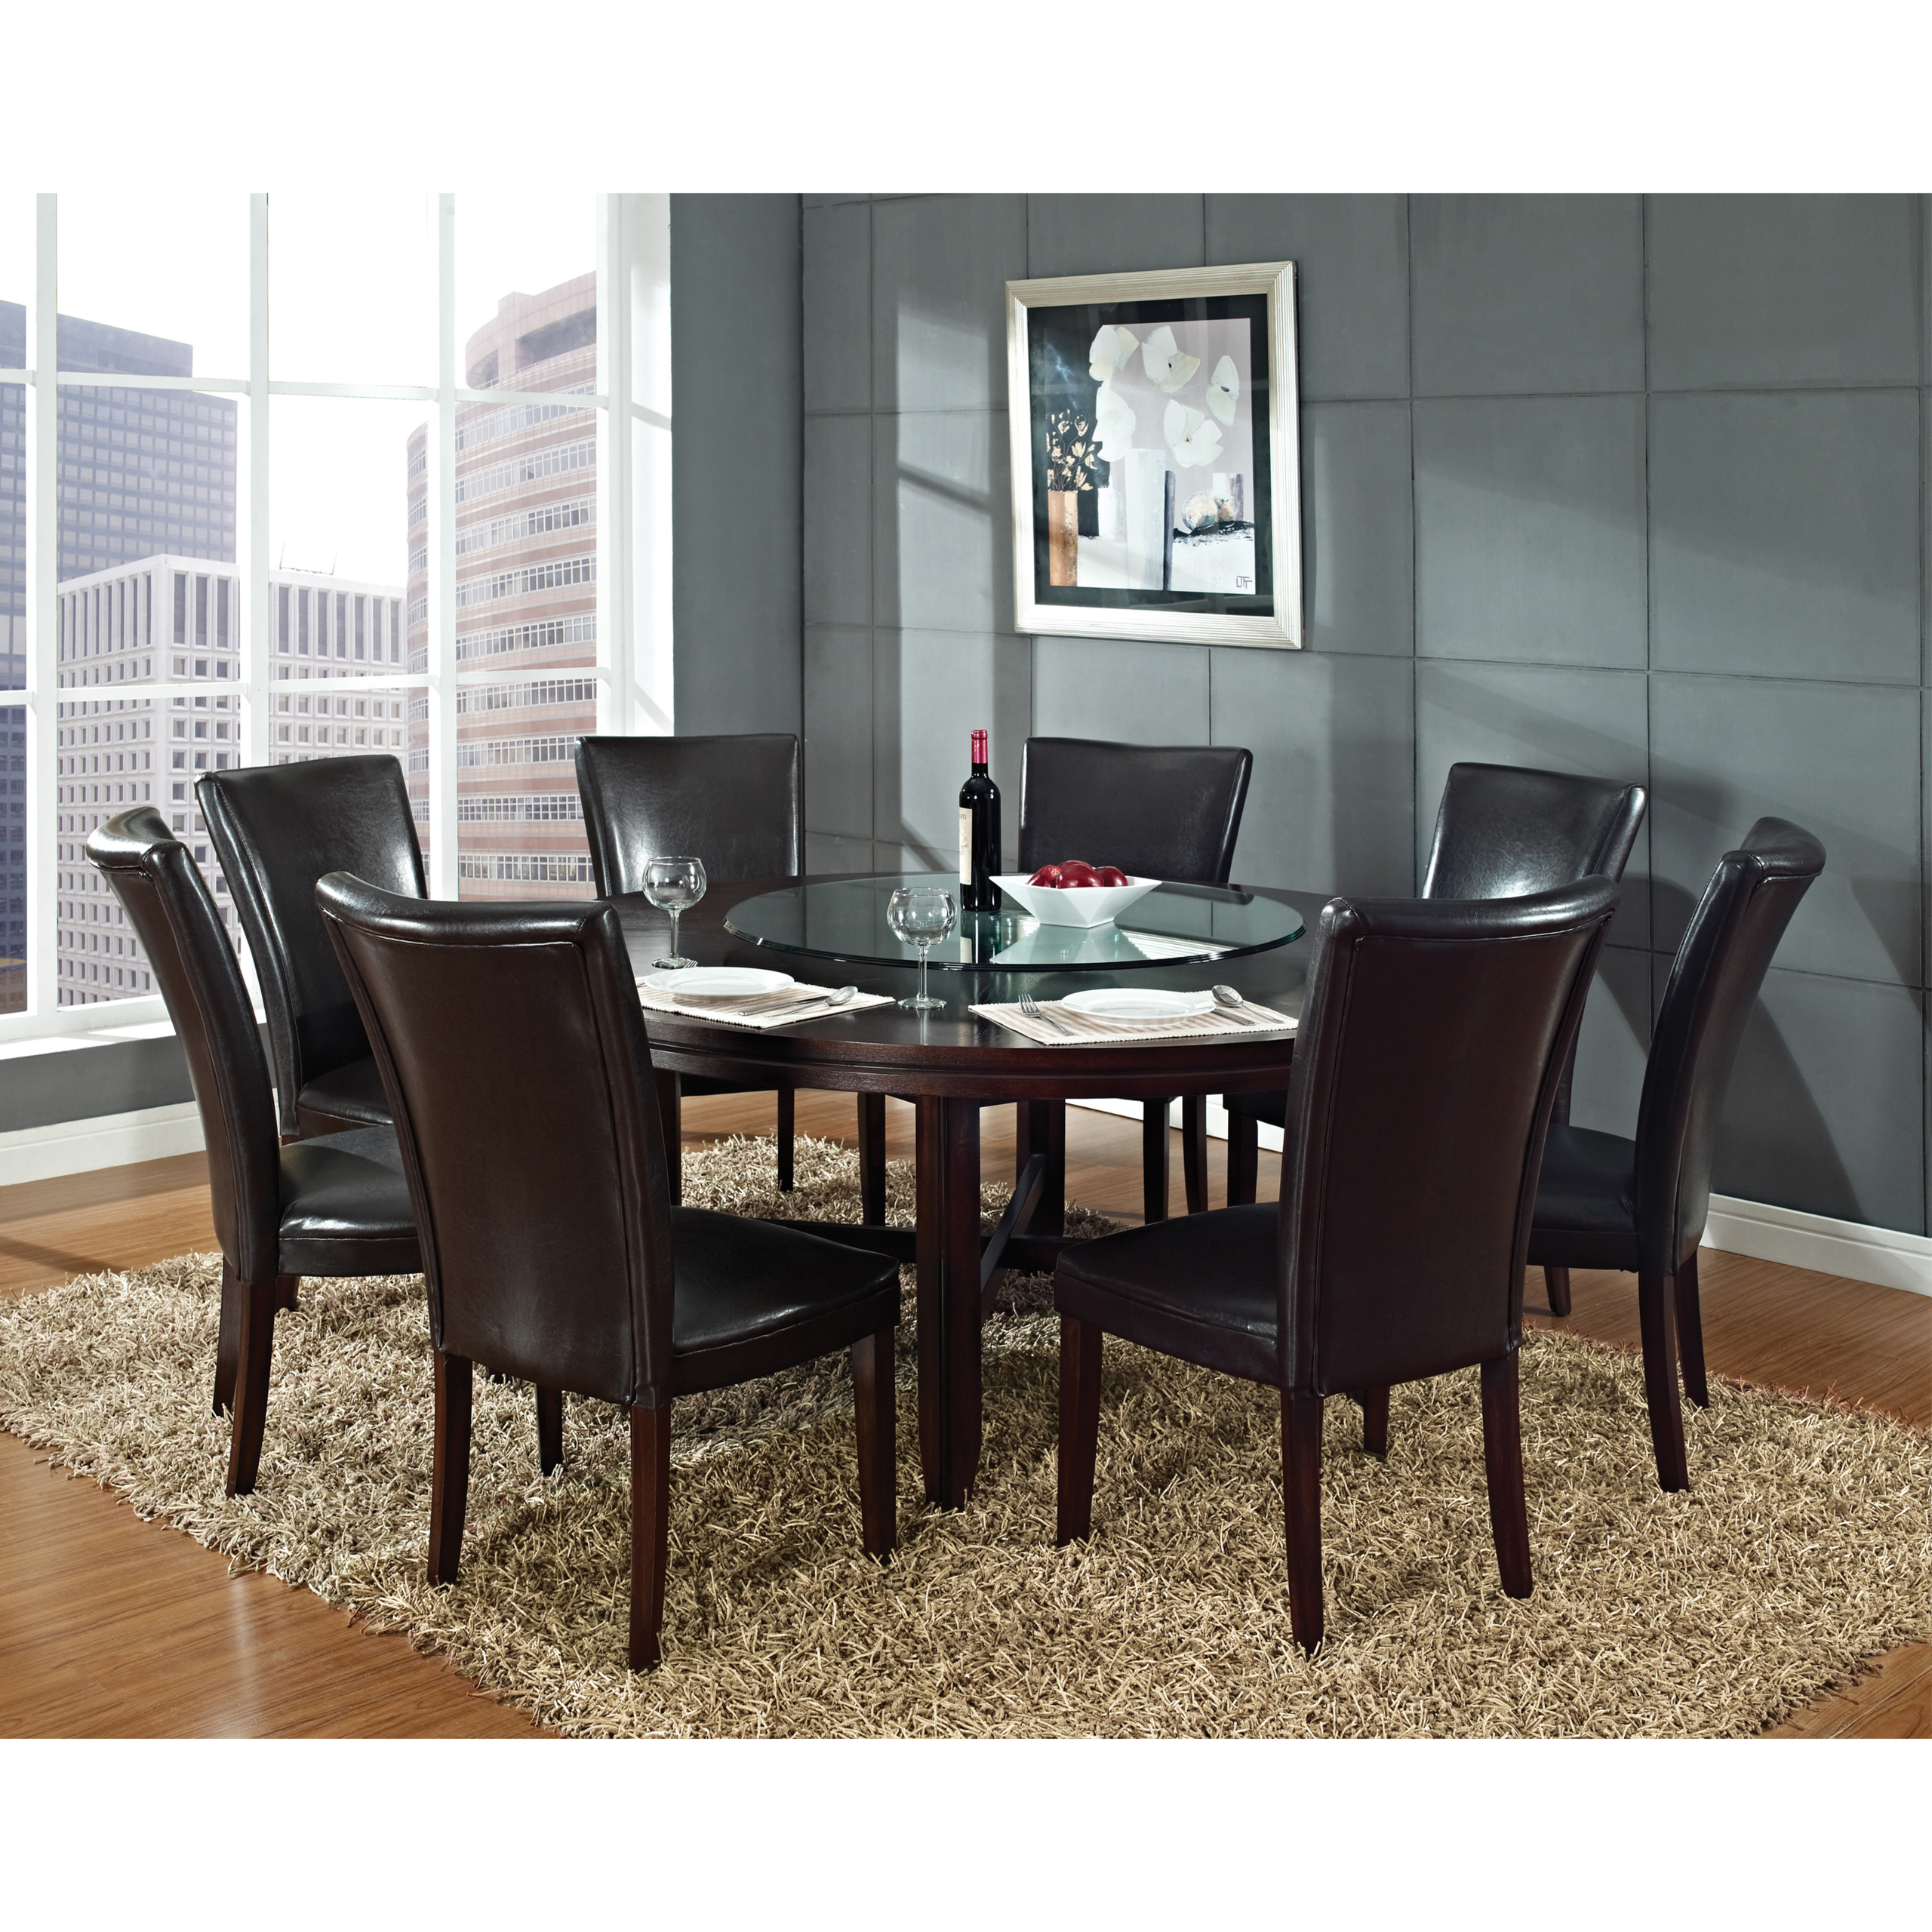 Round Dining Table For 6 Visualhunt, Mid Century Modern Round Dining Table Set For 6 Seater